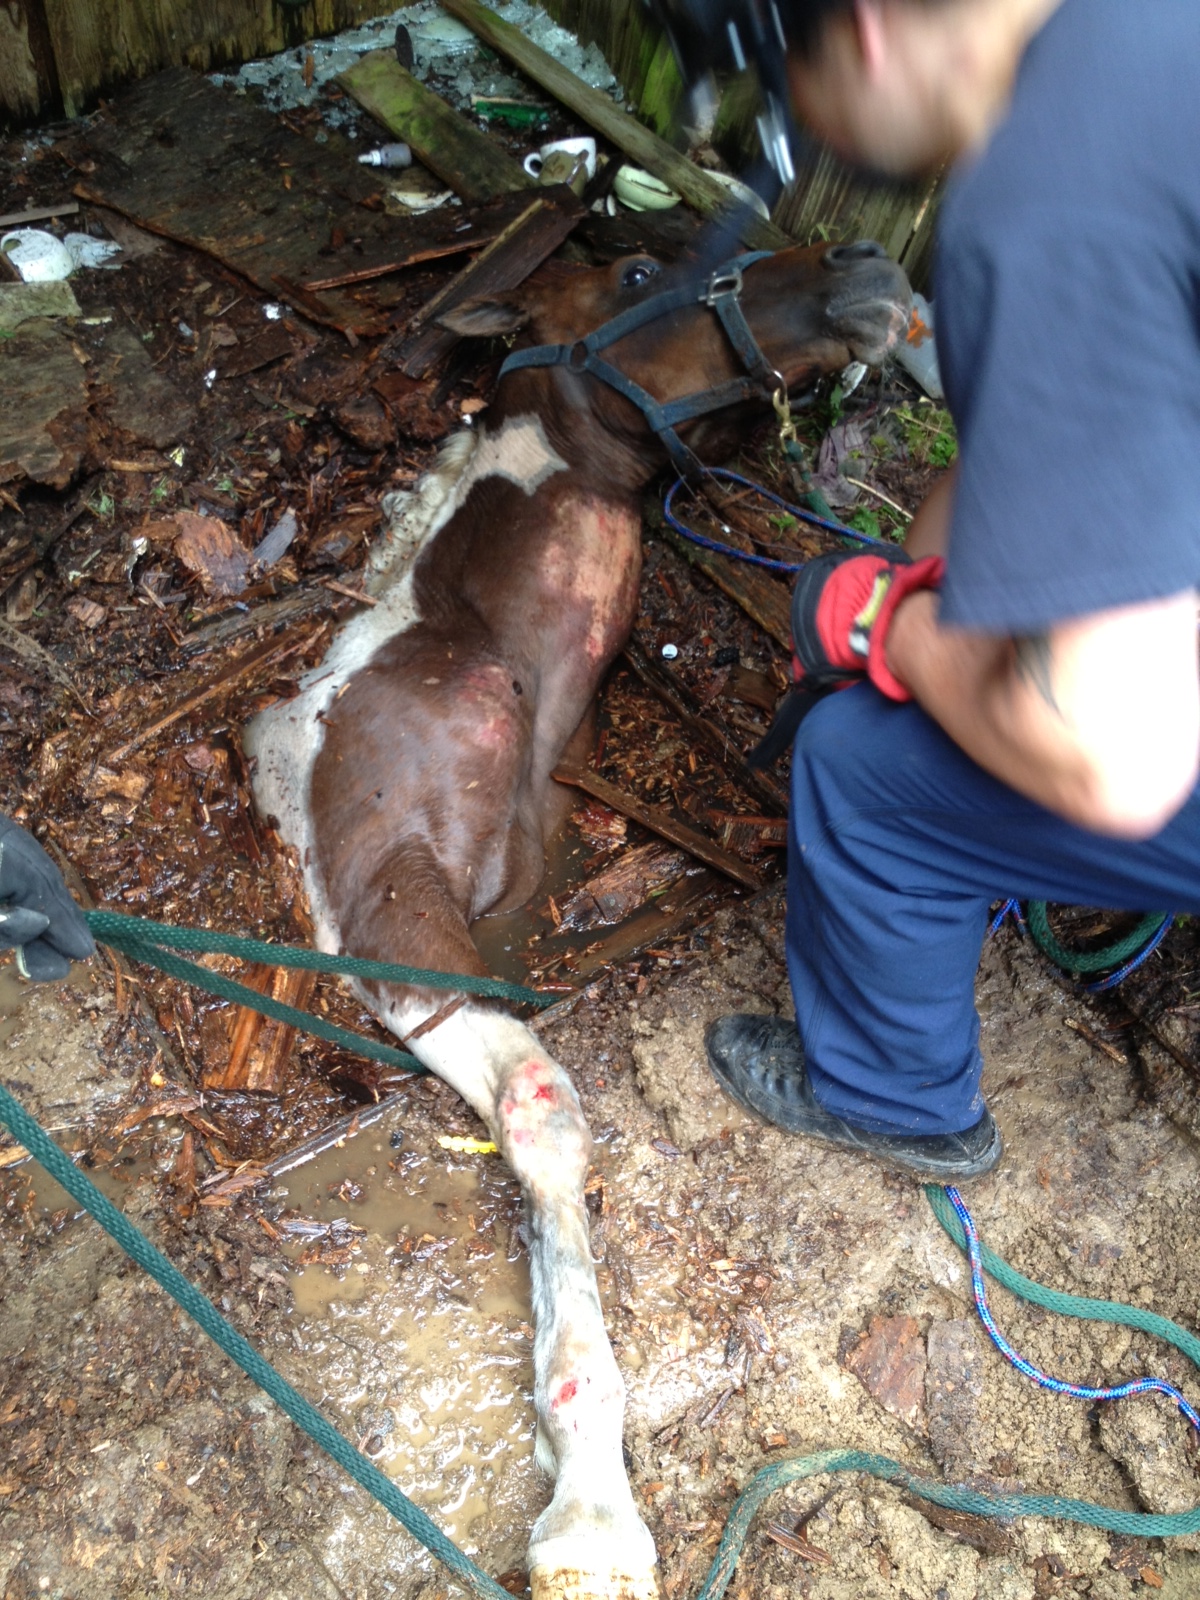 Photo of a horse trapped in a well, the horse's front quarter and head are outside the well. Two people stand nearby, working to get it out.